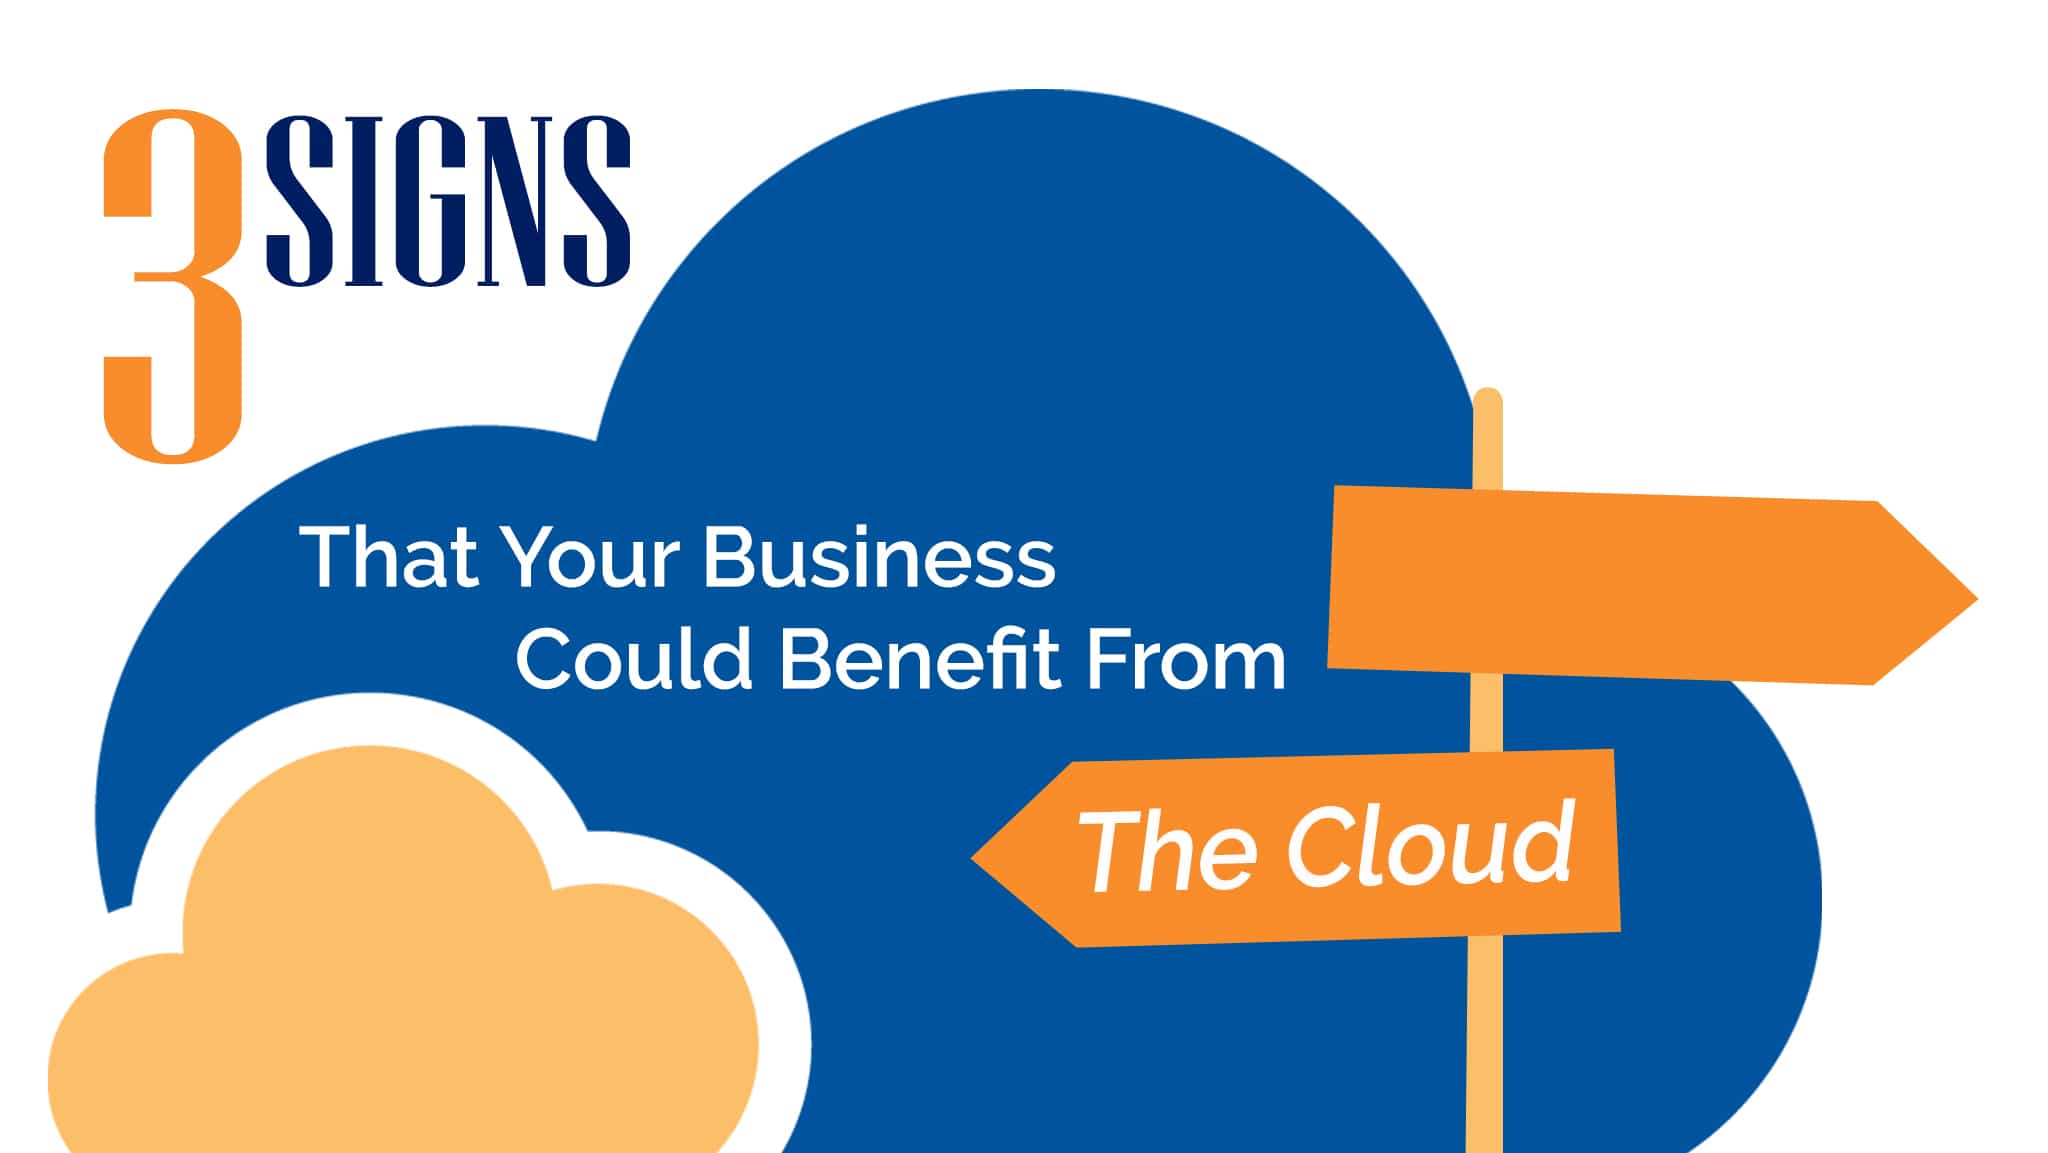 3 Signs That Your Business Could Benefit From The Cloud